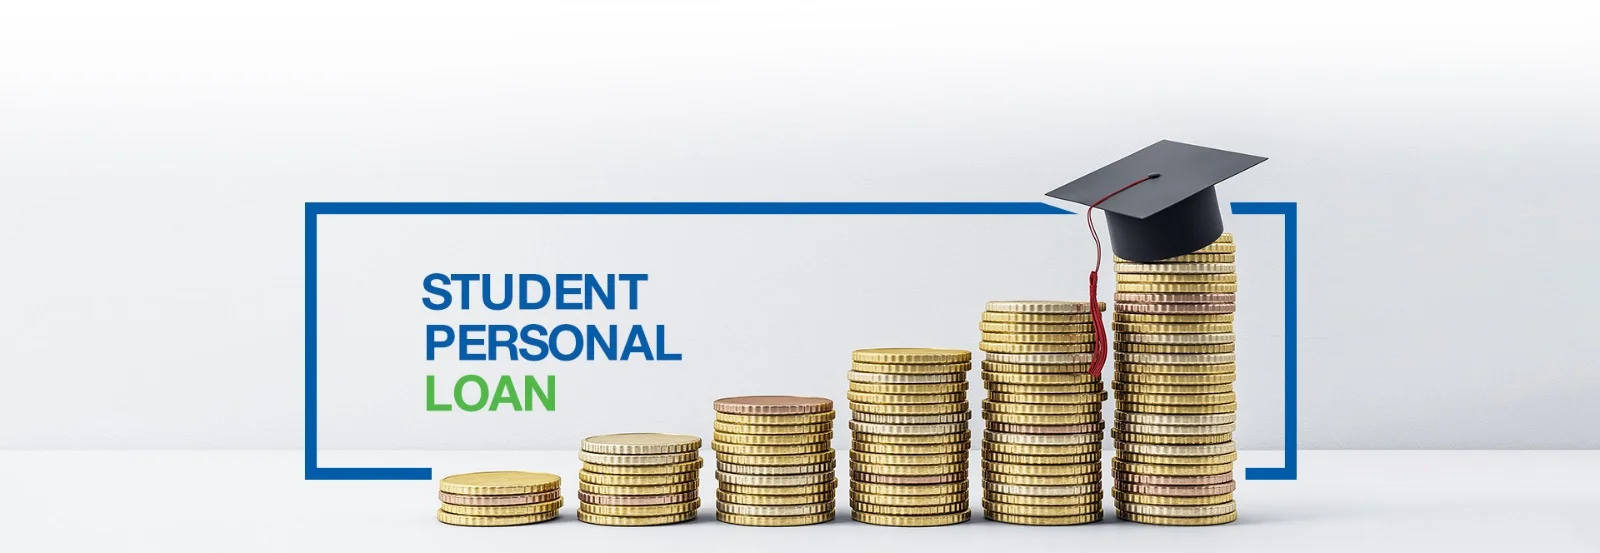 Student Personal Loan